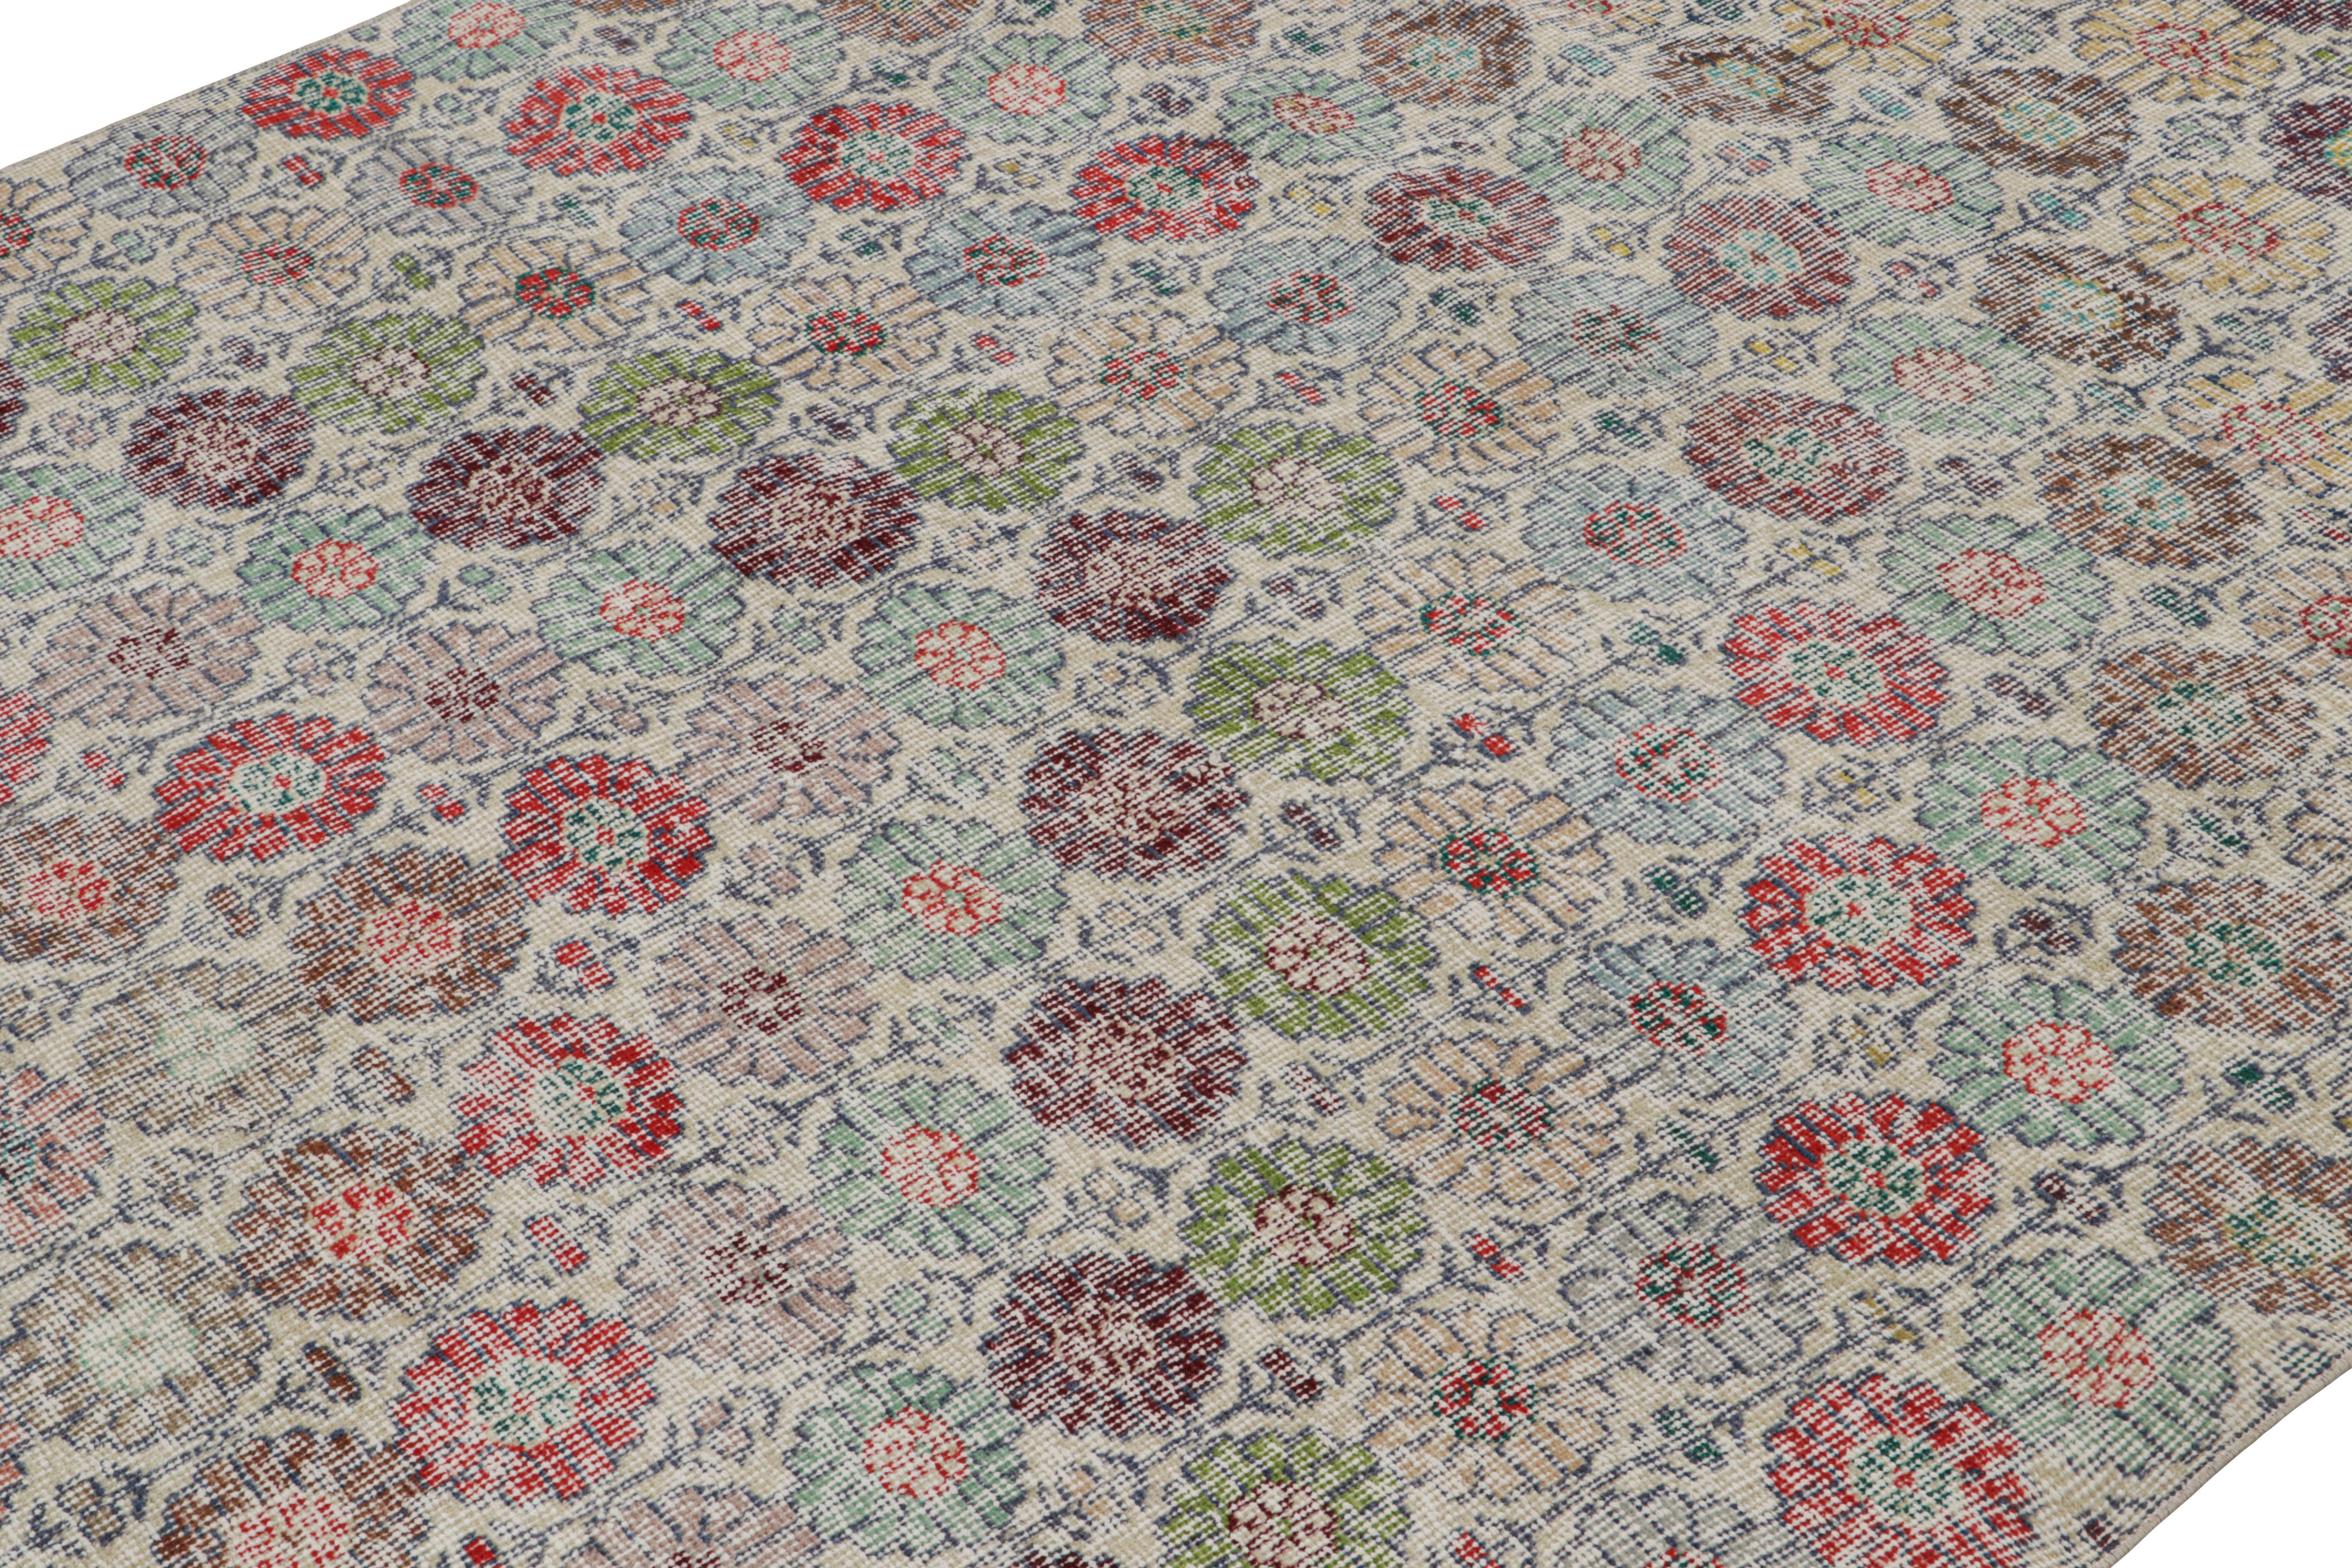 Hand-Knotted Vintage Zeki Müren Rug with Polychromatic Floral Patterns, from Rug & Kilim  For Sale